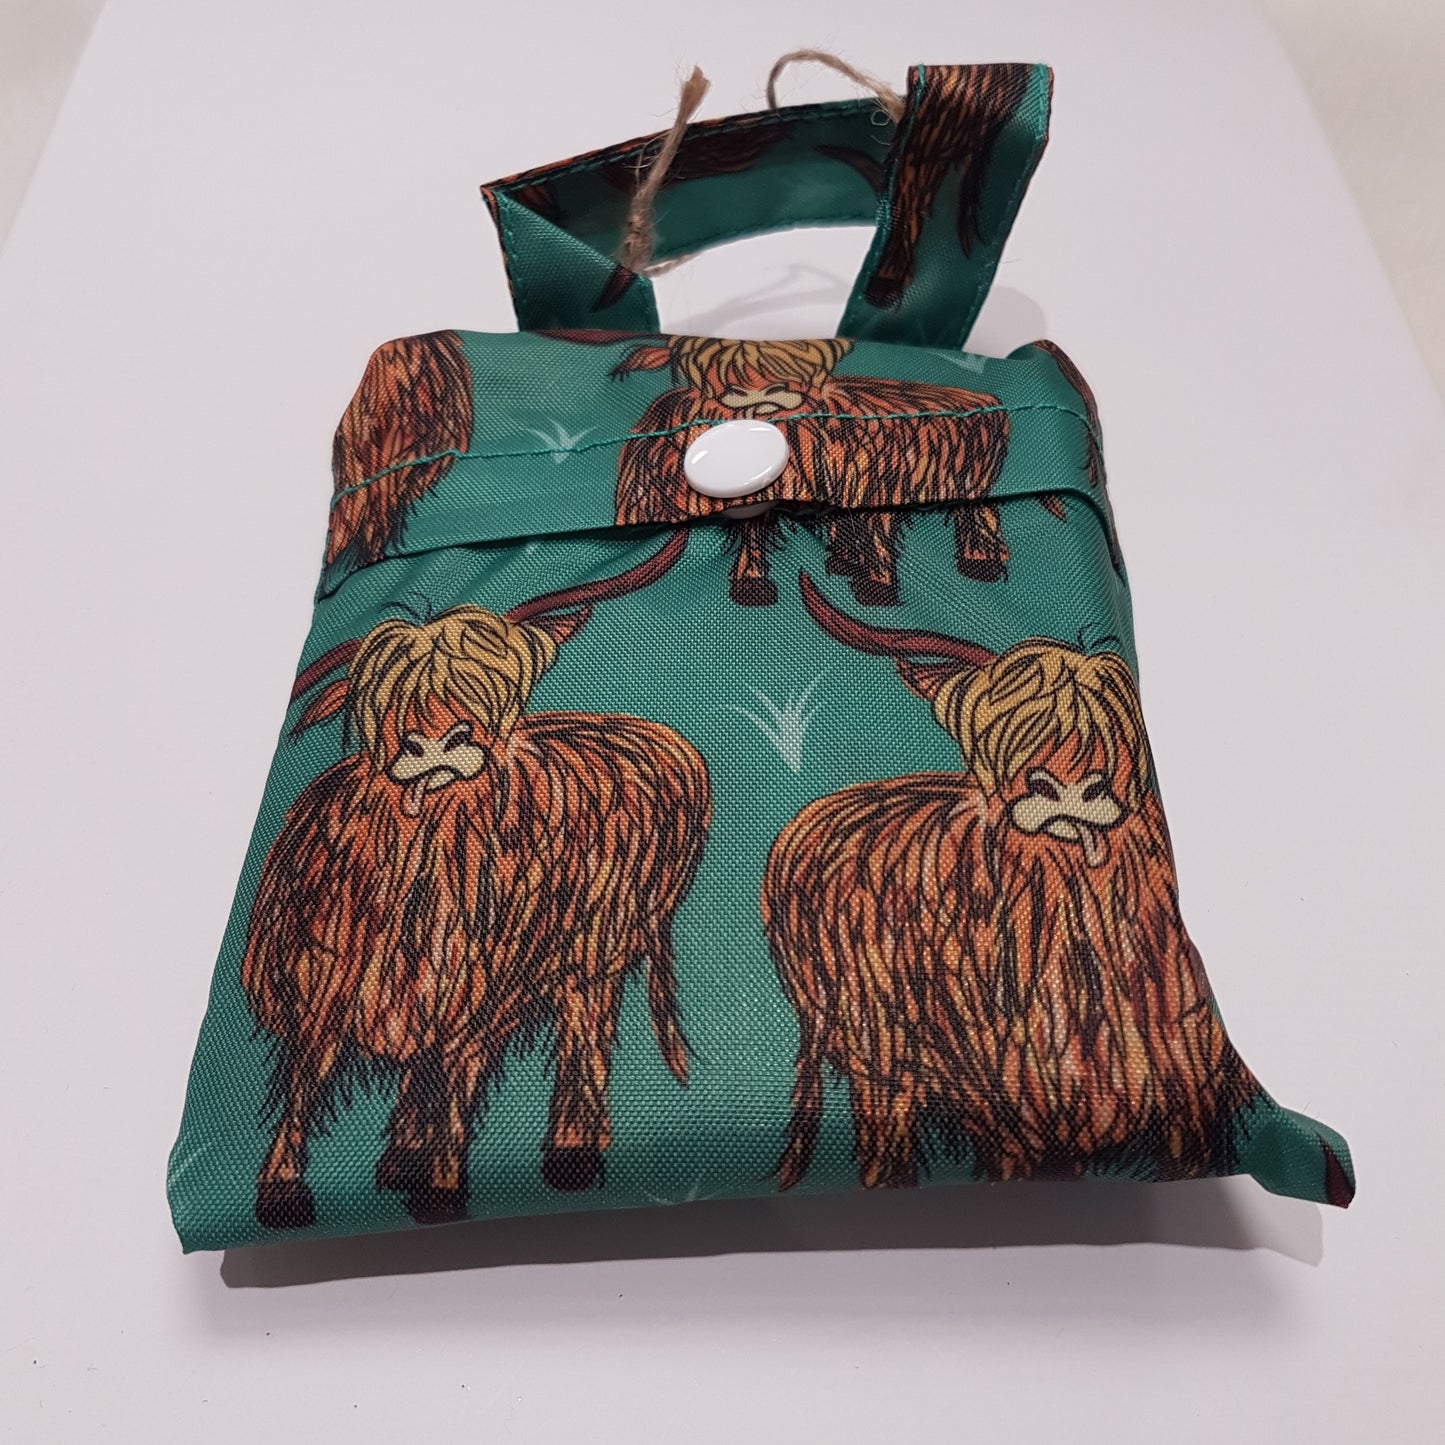 Eco Chic Foldable Shopper Highland Cows